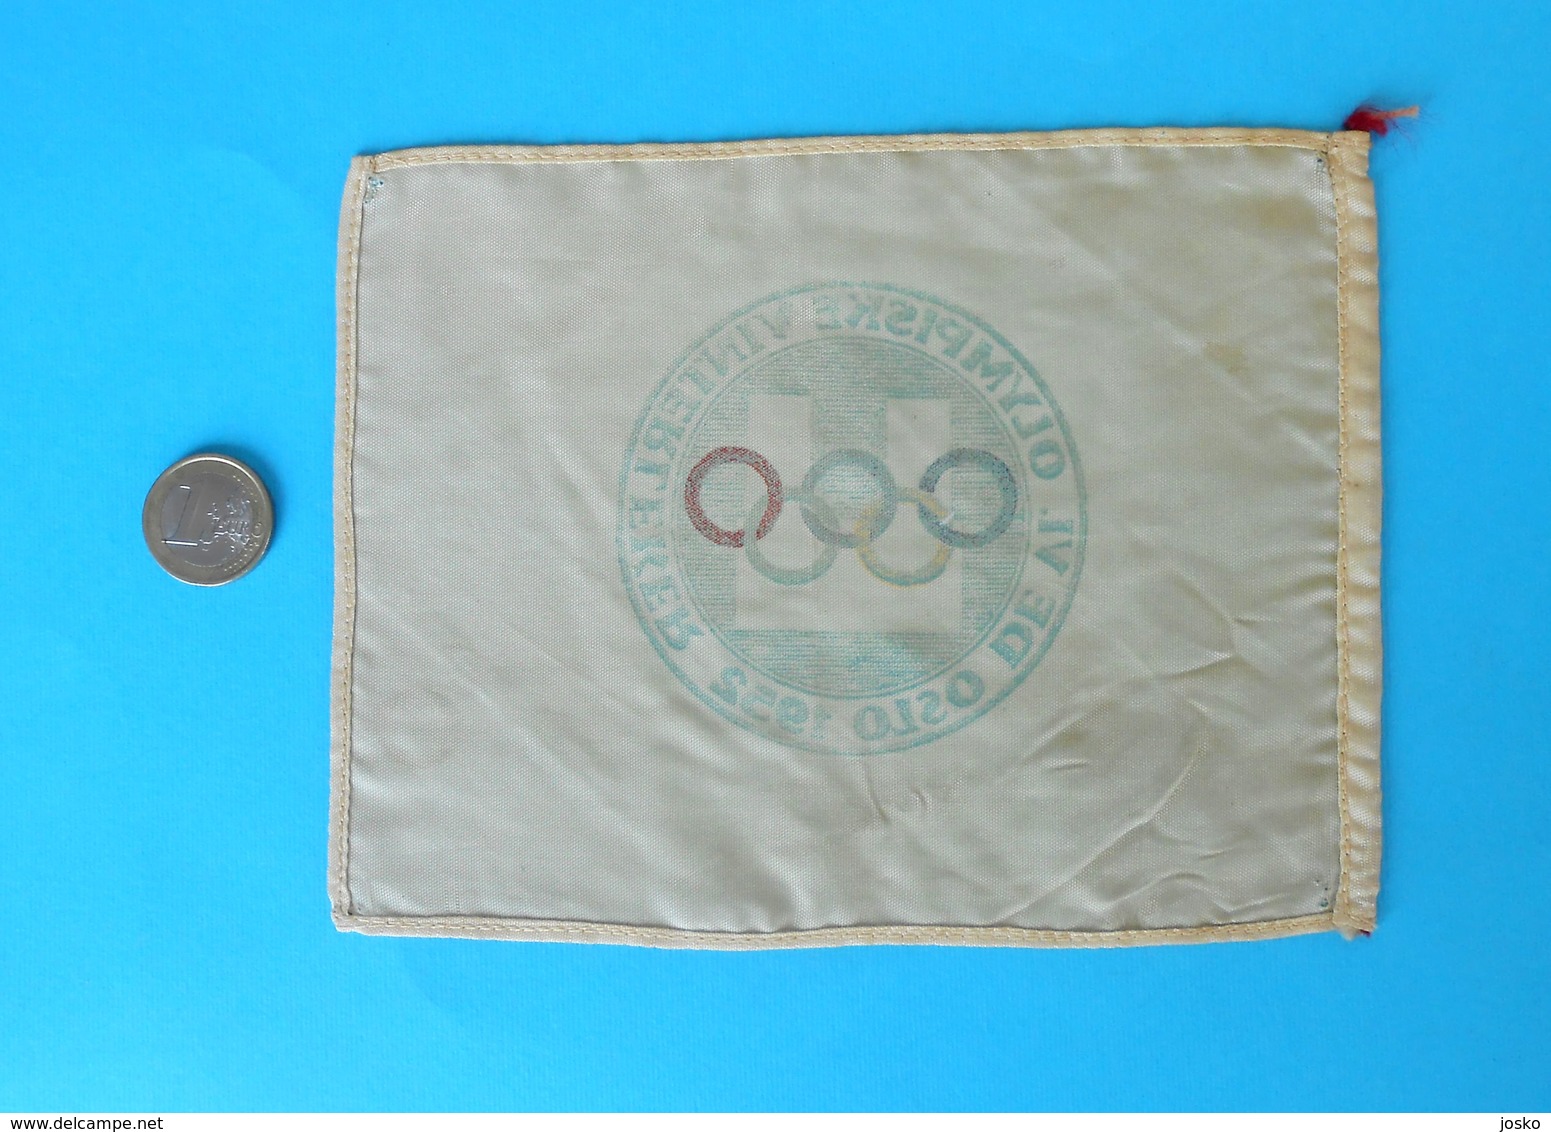 OLYMPIC GAMES 1952. OSLO - NORWAY Original Vintage Beautifull Silk Pennant * Jeux Olympiques Olympiad Olympia Olympiade - Apparel, Souvenirs & Other